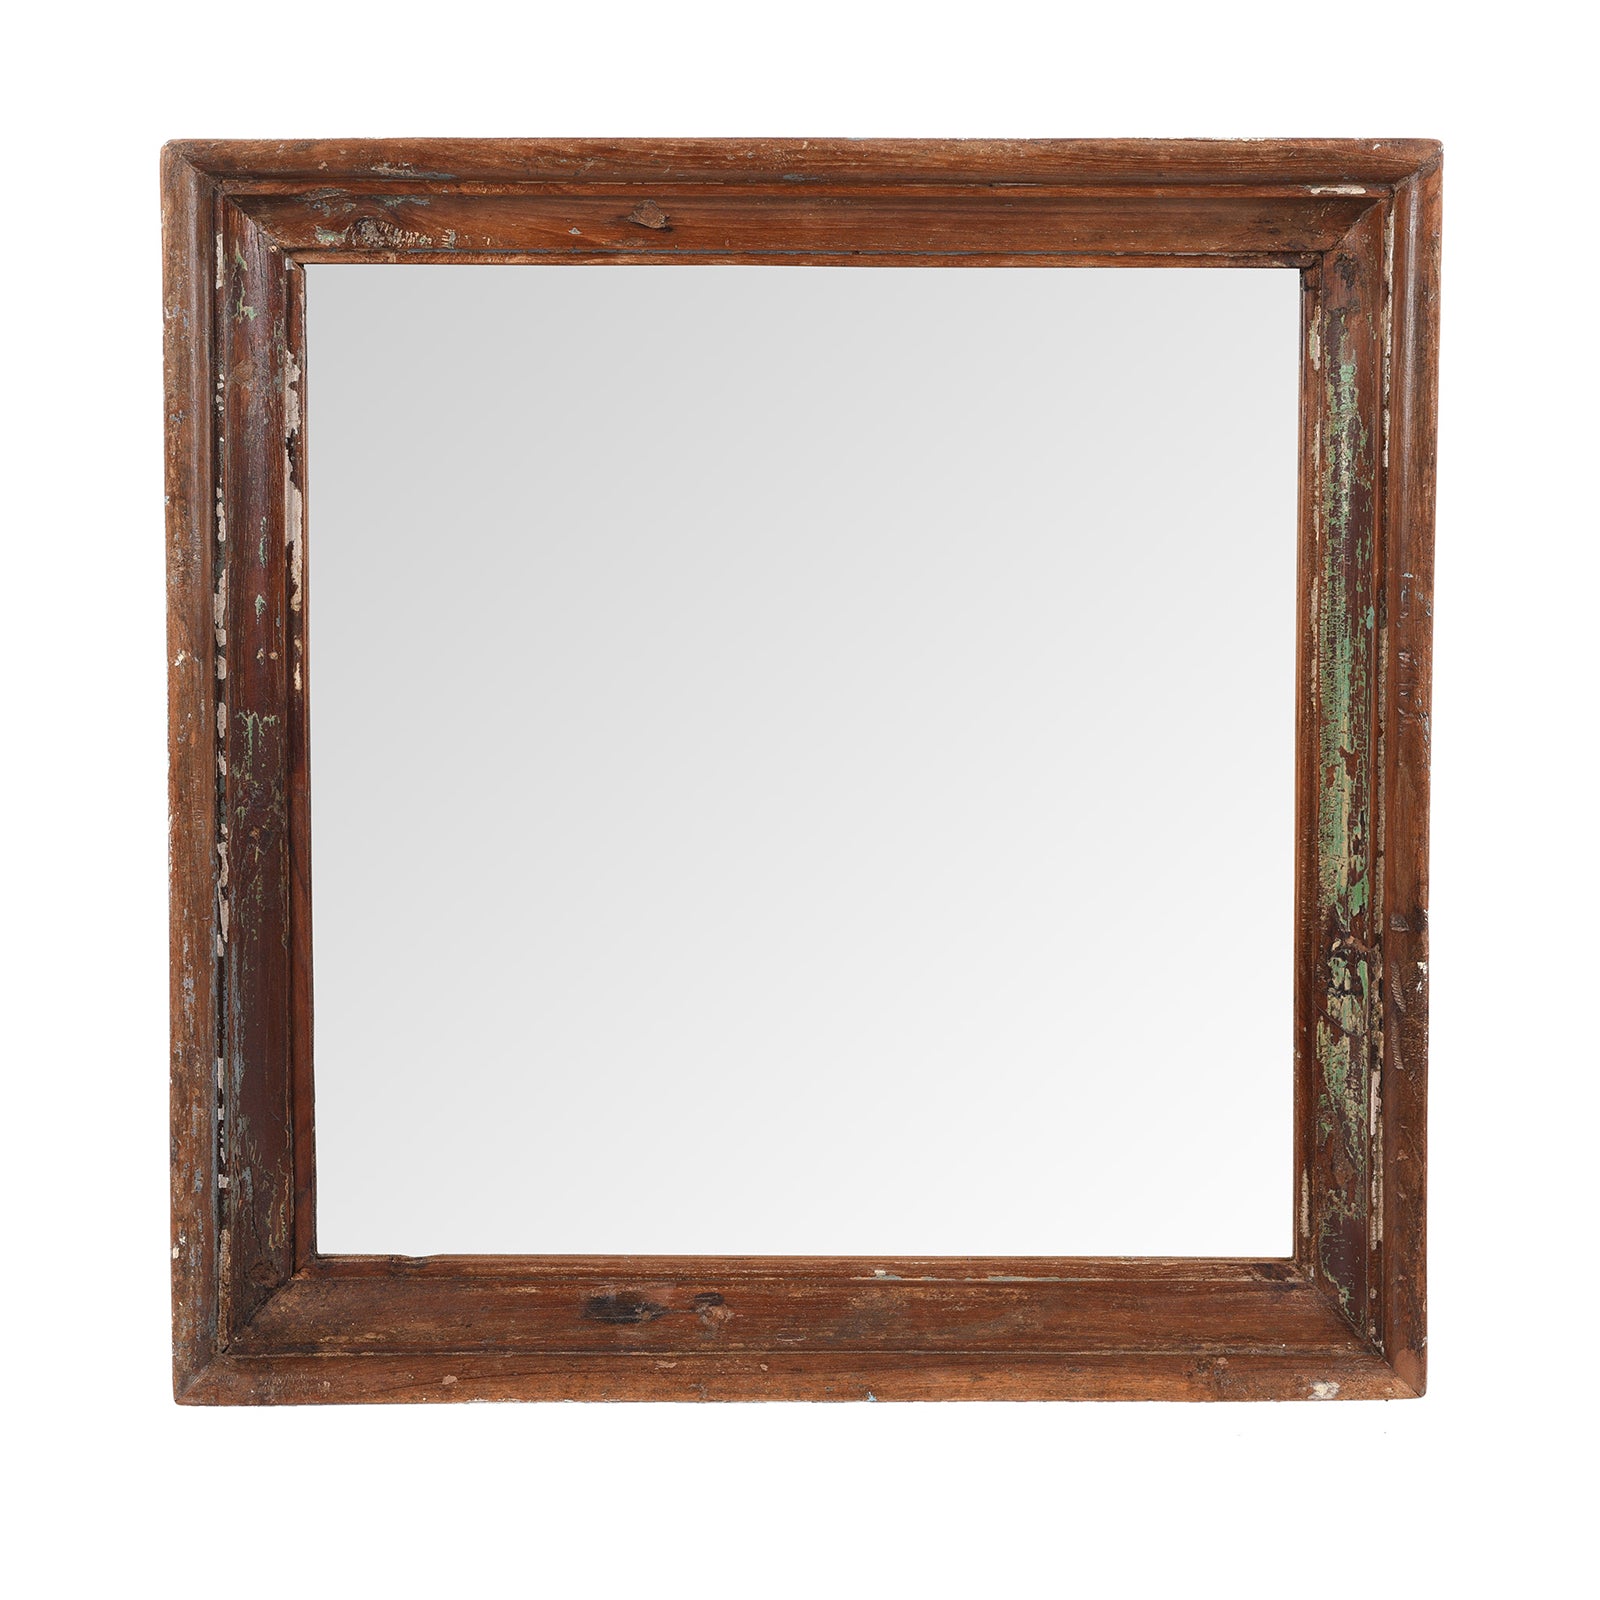 Painted Mirror Made From Old Architectural Teak | Indigo Antiques